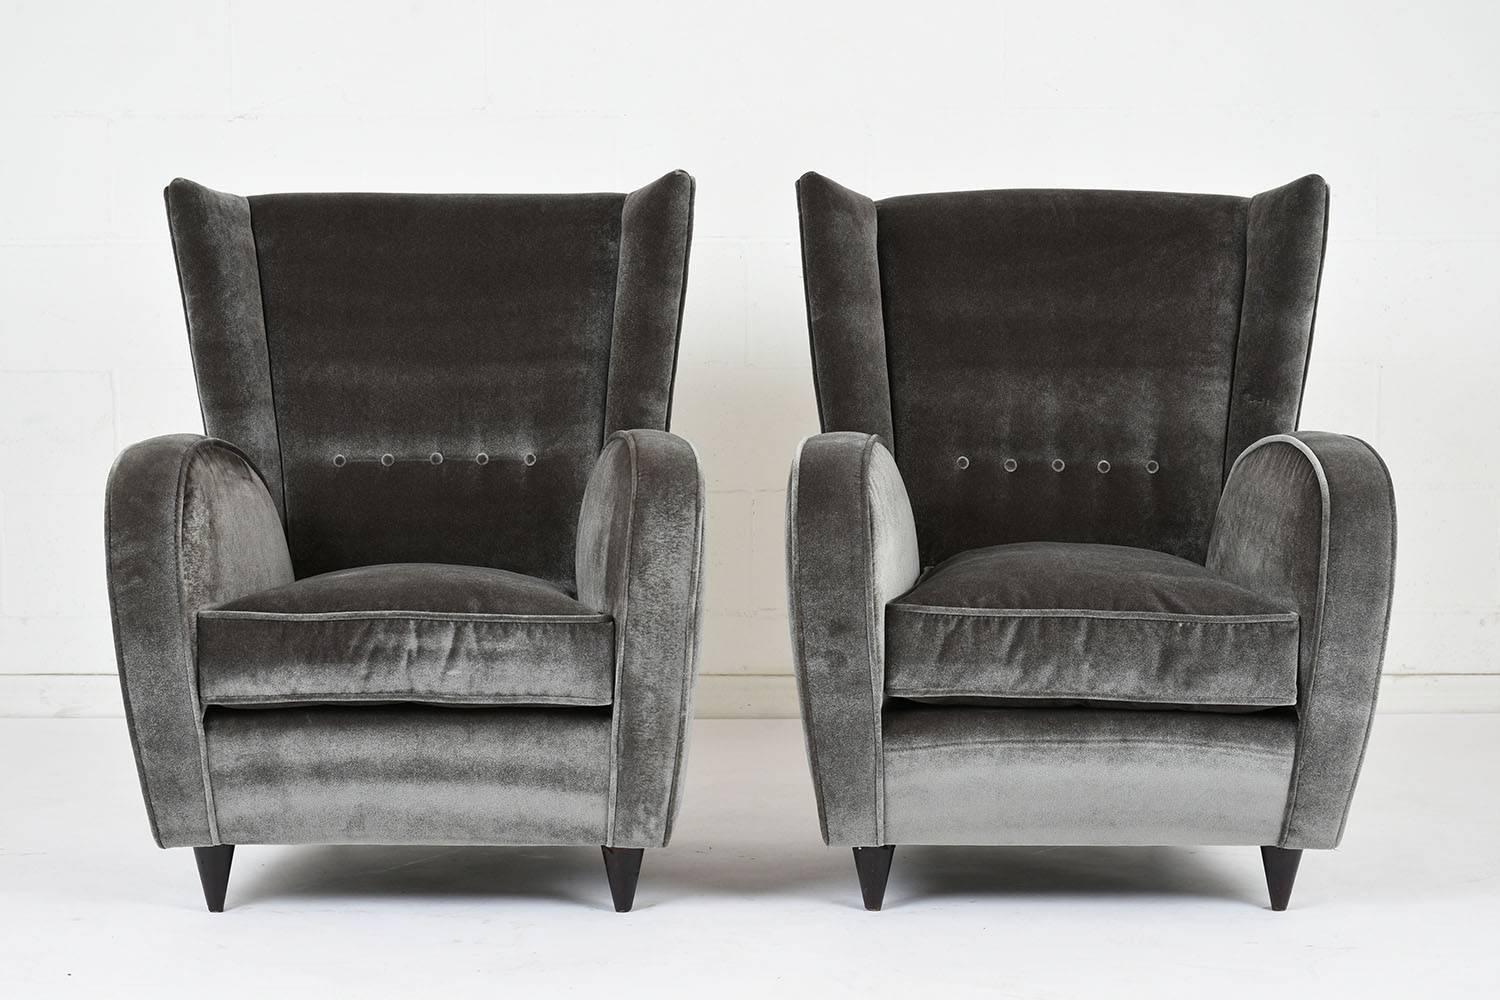 This pair of 1950s Modern style lounge chairs are designed by Paolo Buffa. The chairs have been completely restored with new upholstery in a dark grey mohair velvet fabric. The chairs have single piping trim details and tufted details on the seat